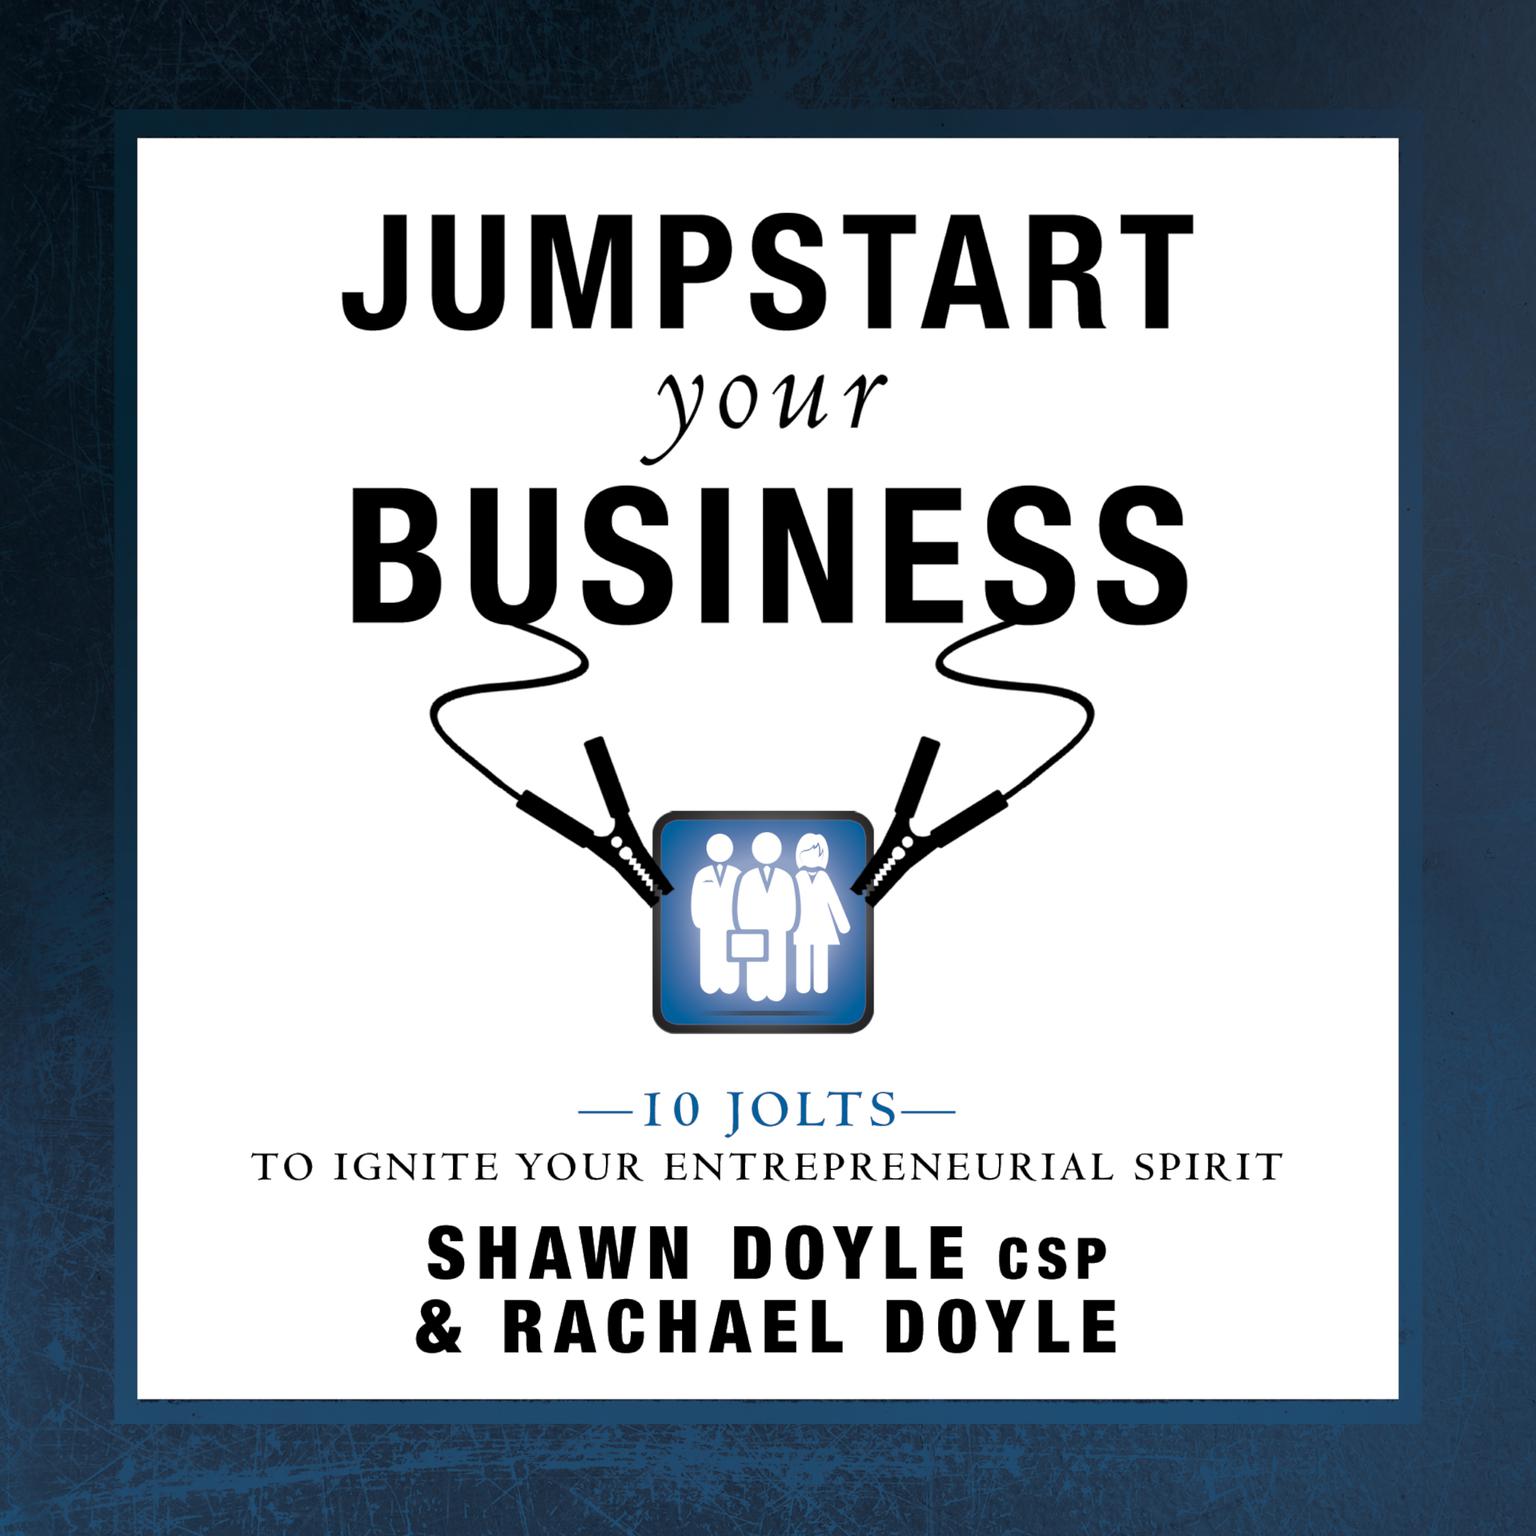 Jumpstart Your Business:10 Jolts to Ignite Your Entrepreneurial Spirit Audiobook, by Rachael Doyle